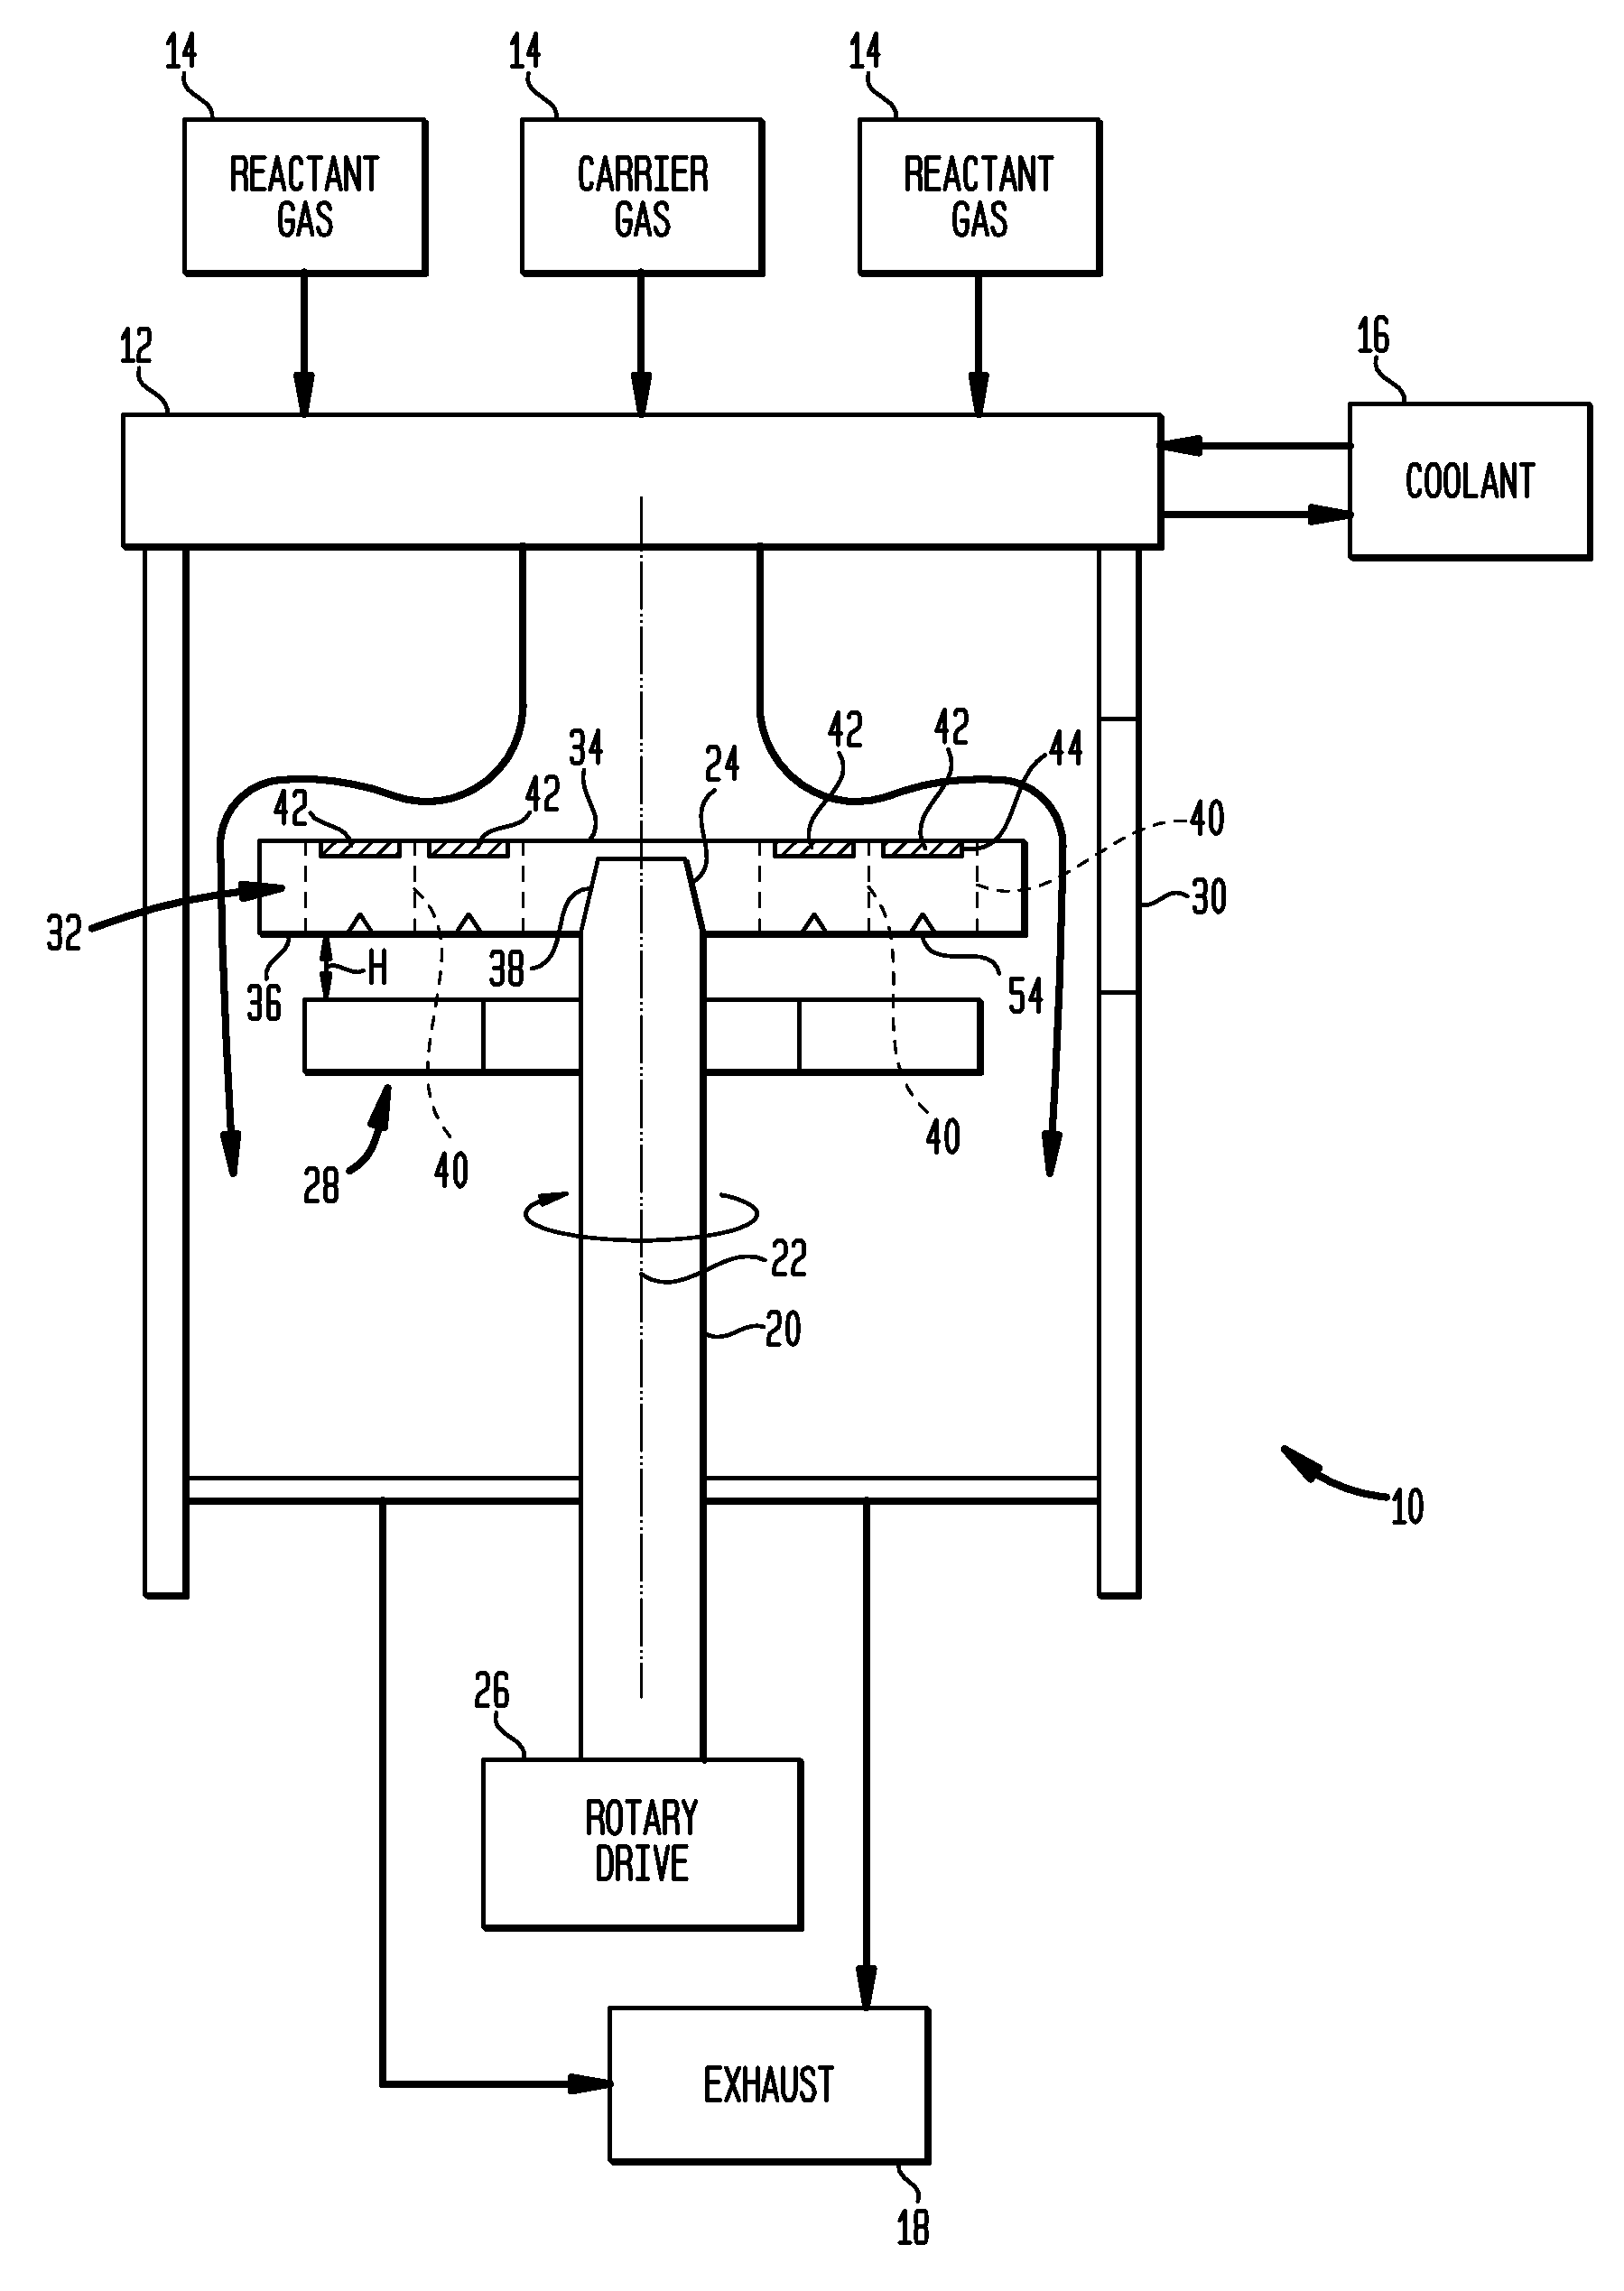 Wafer carrier with varying thermal resistance